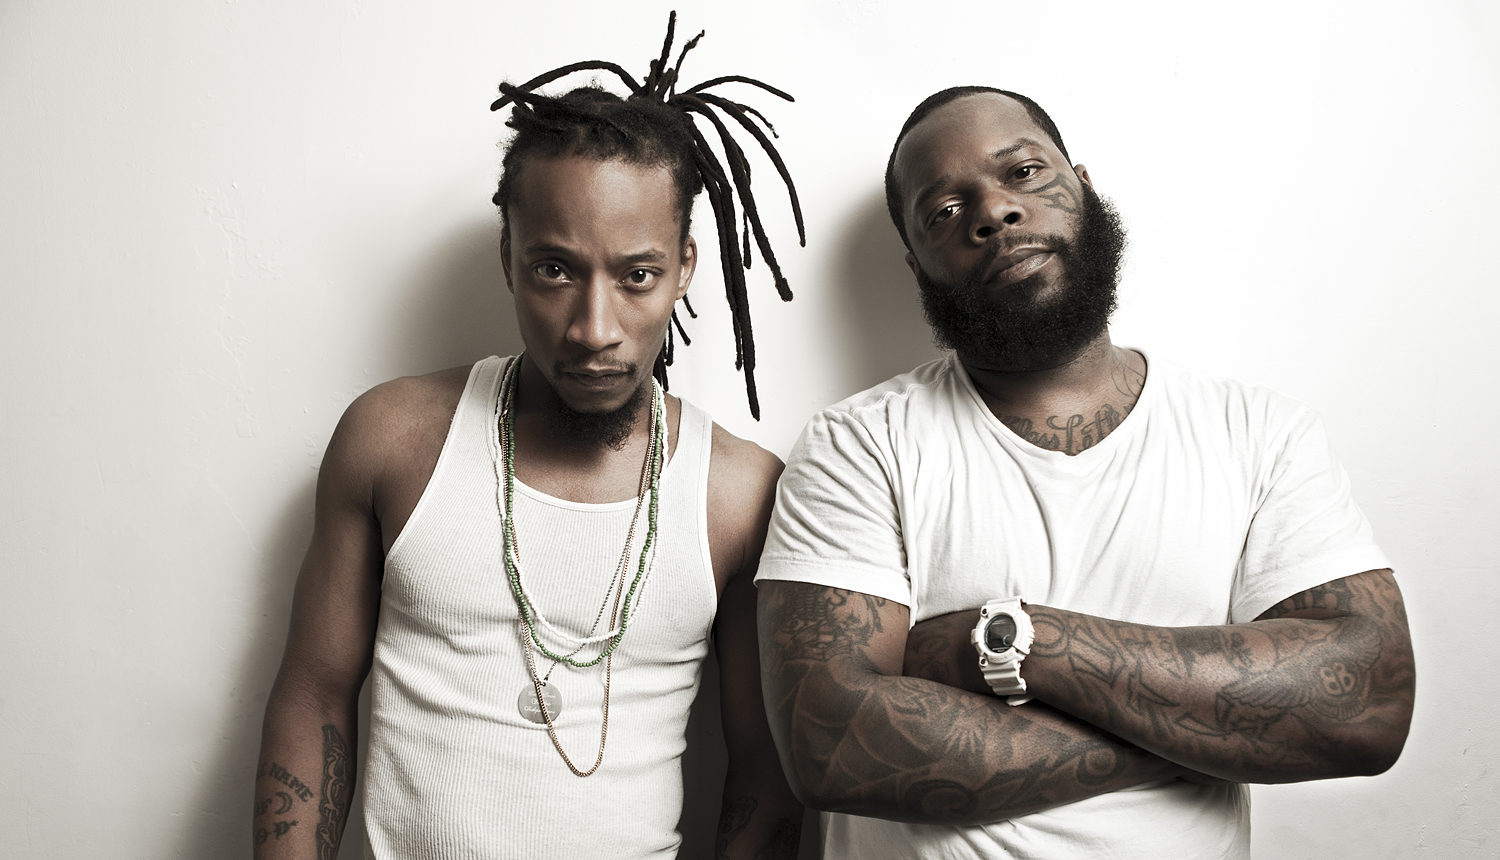 SMIF N WESSUN ROCK OF HELTAH SKELTAH with a Sean Price Tribute Show of BOOT CAMP CLIK – March/April – 2016